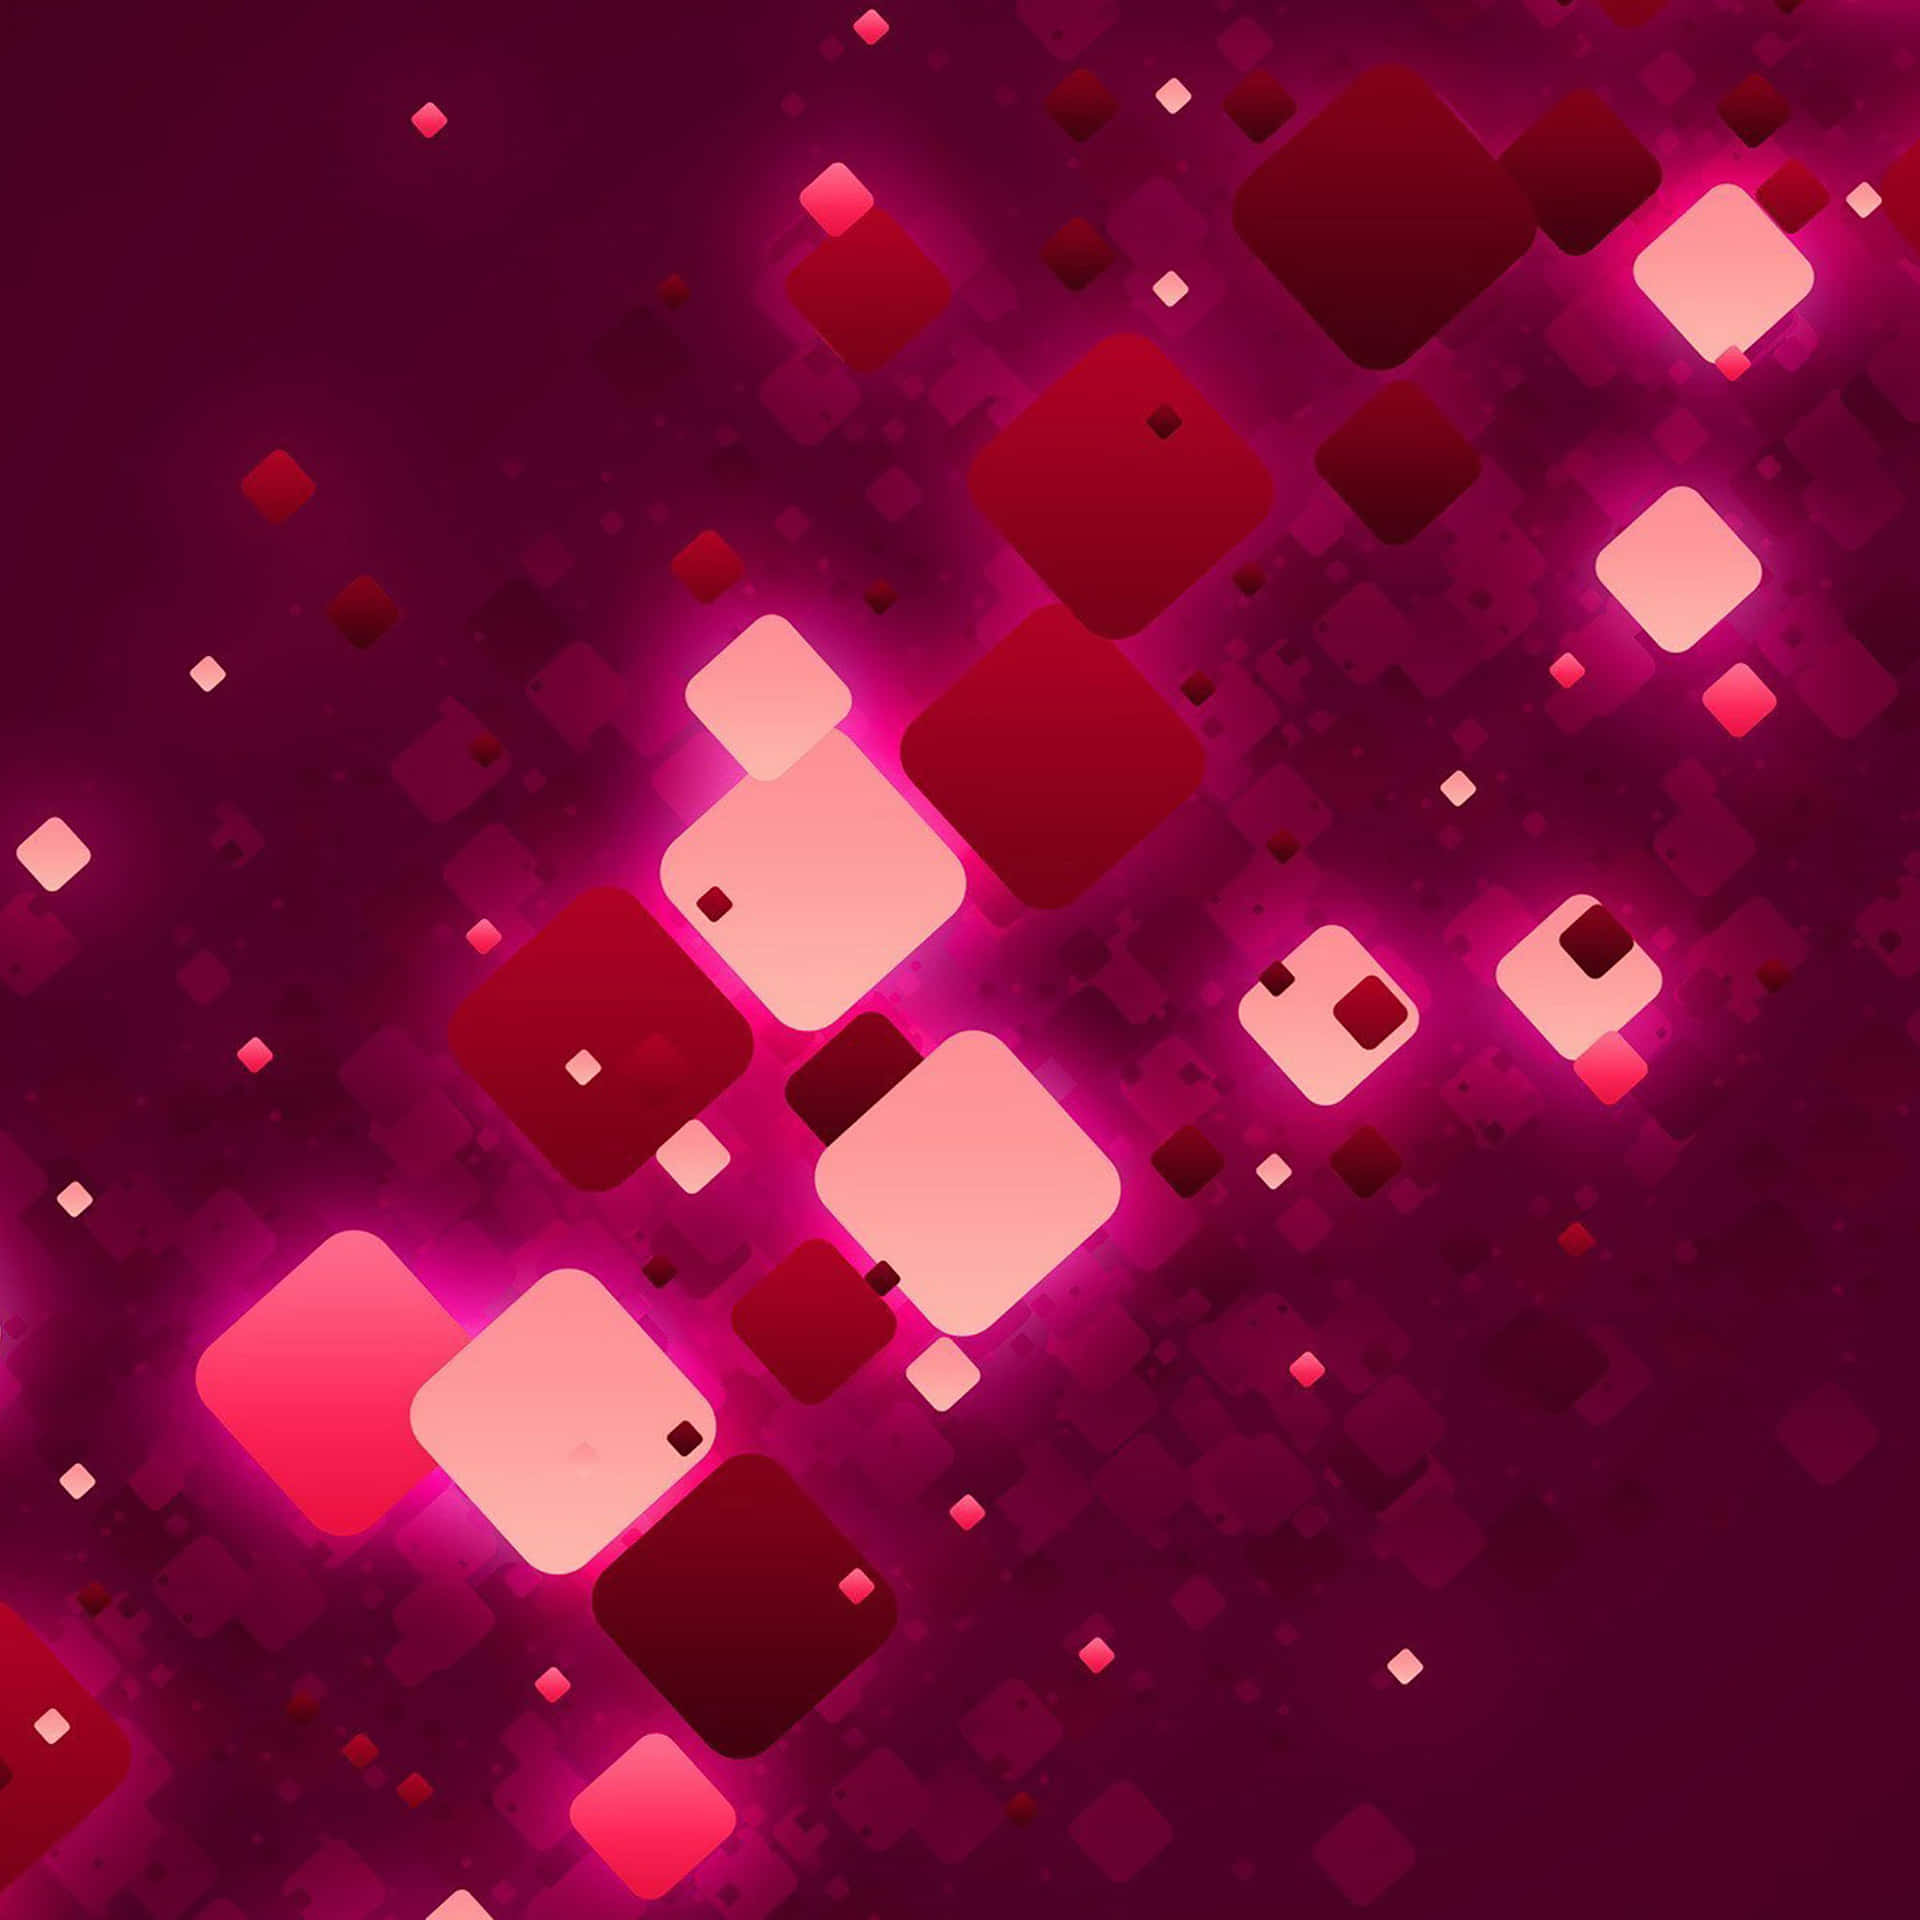 A Pink And Purple Abstract Background With Squares Wallpaper